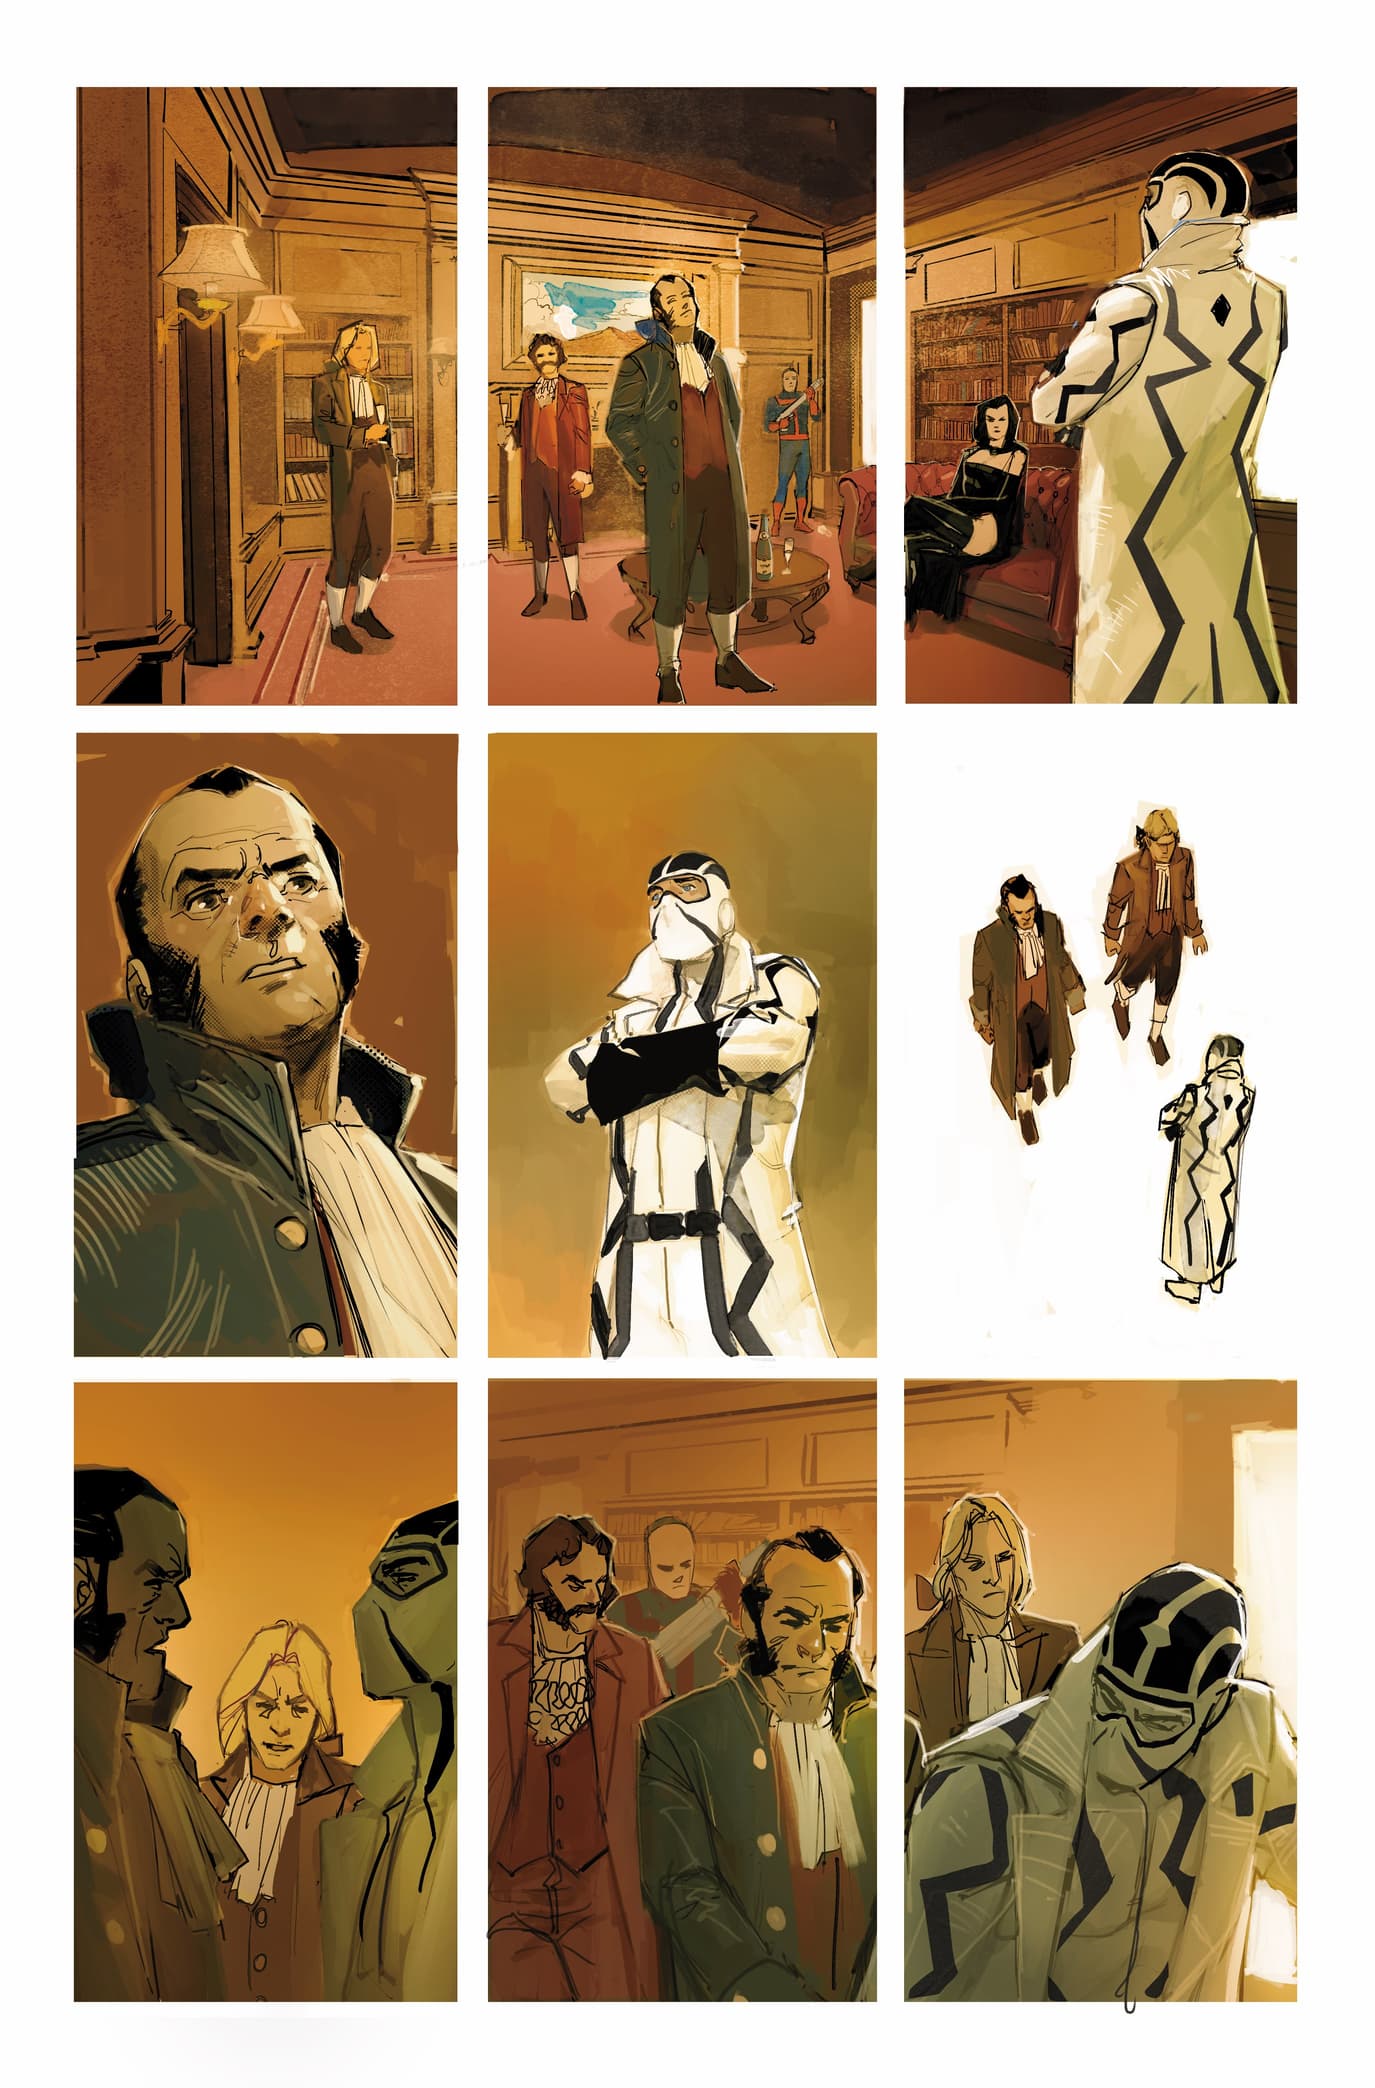 GIANT-SIZE X-MEN: FANTOMEX #1 preview interiors by Rod Reis